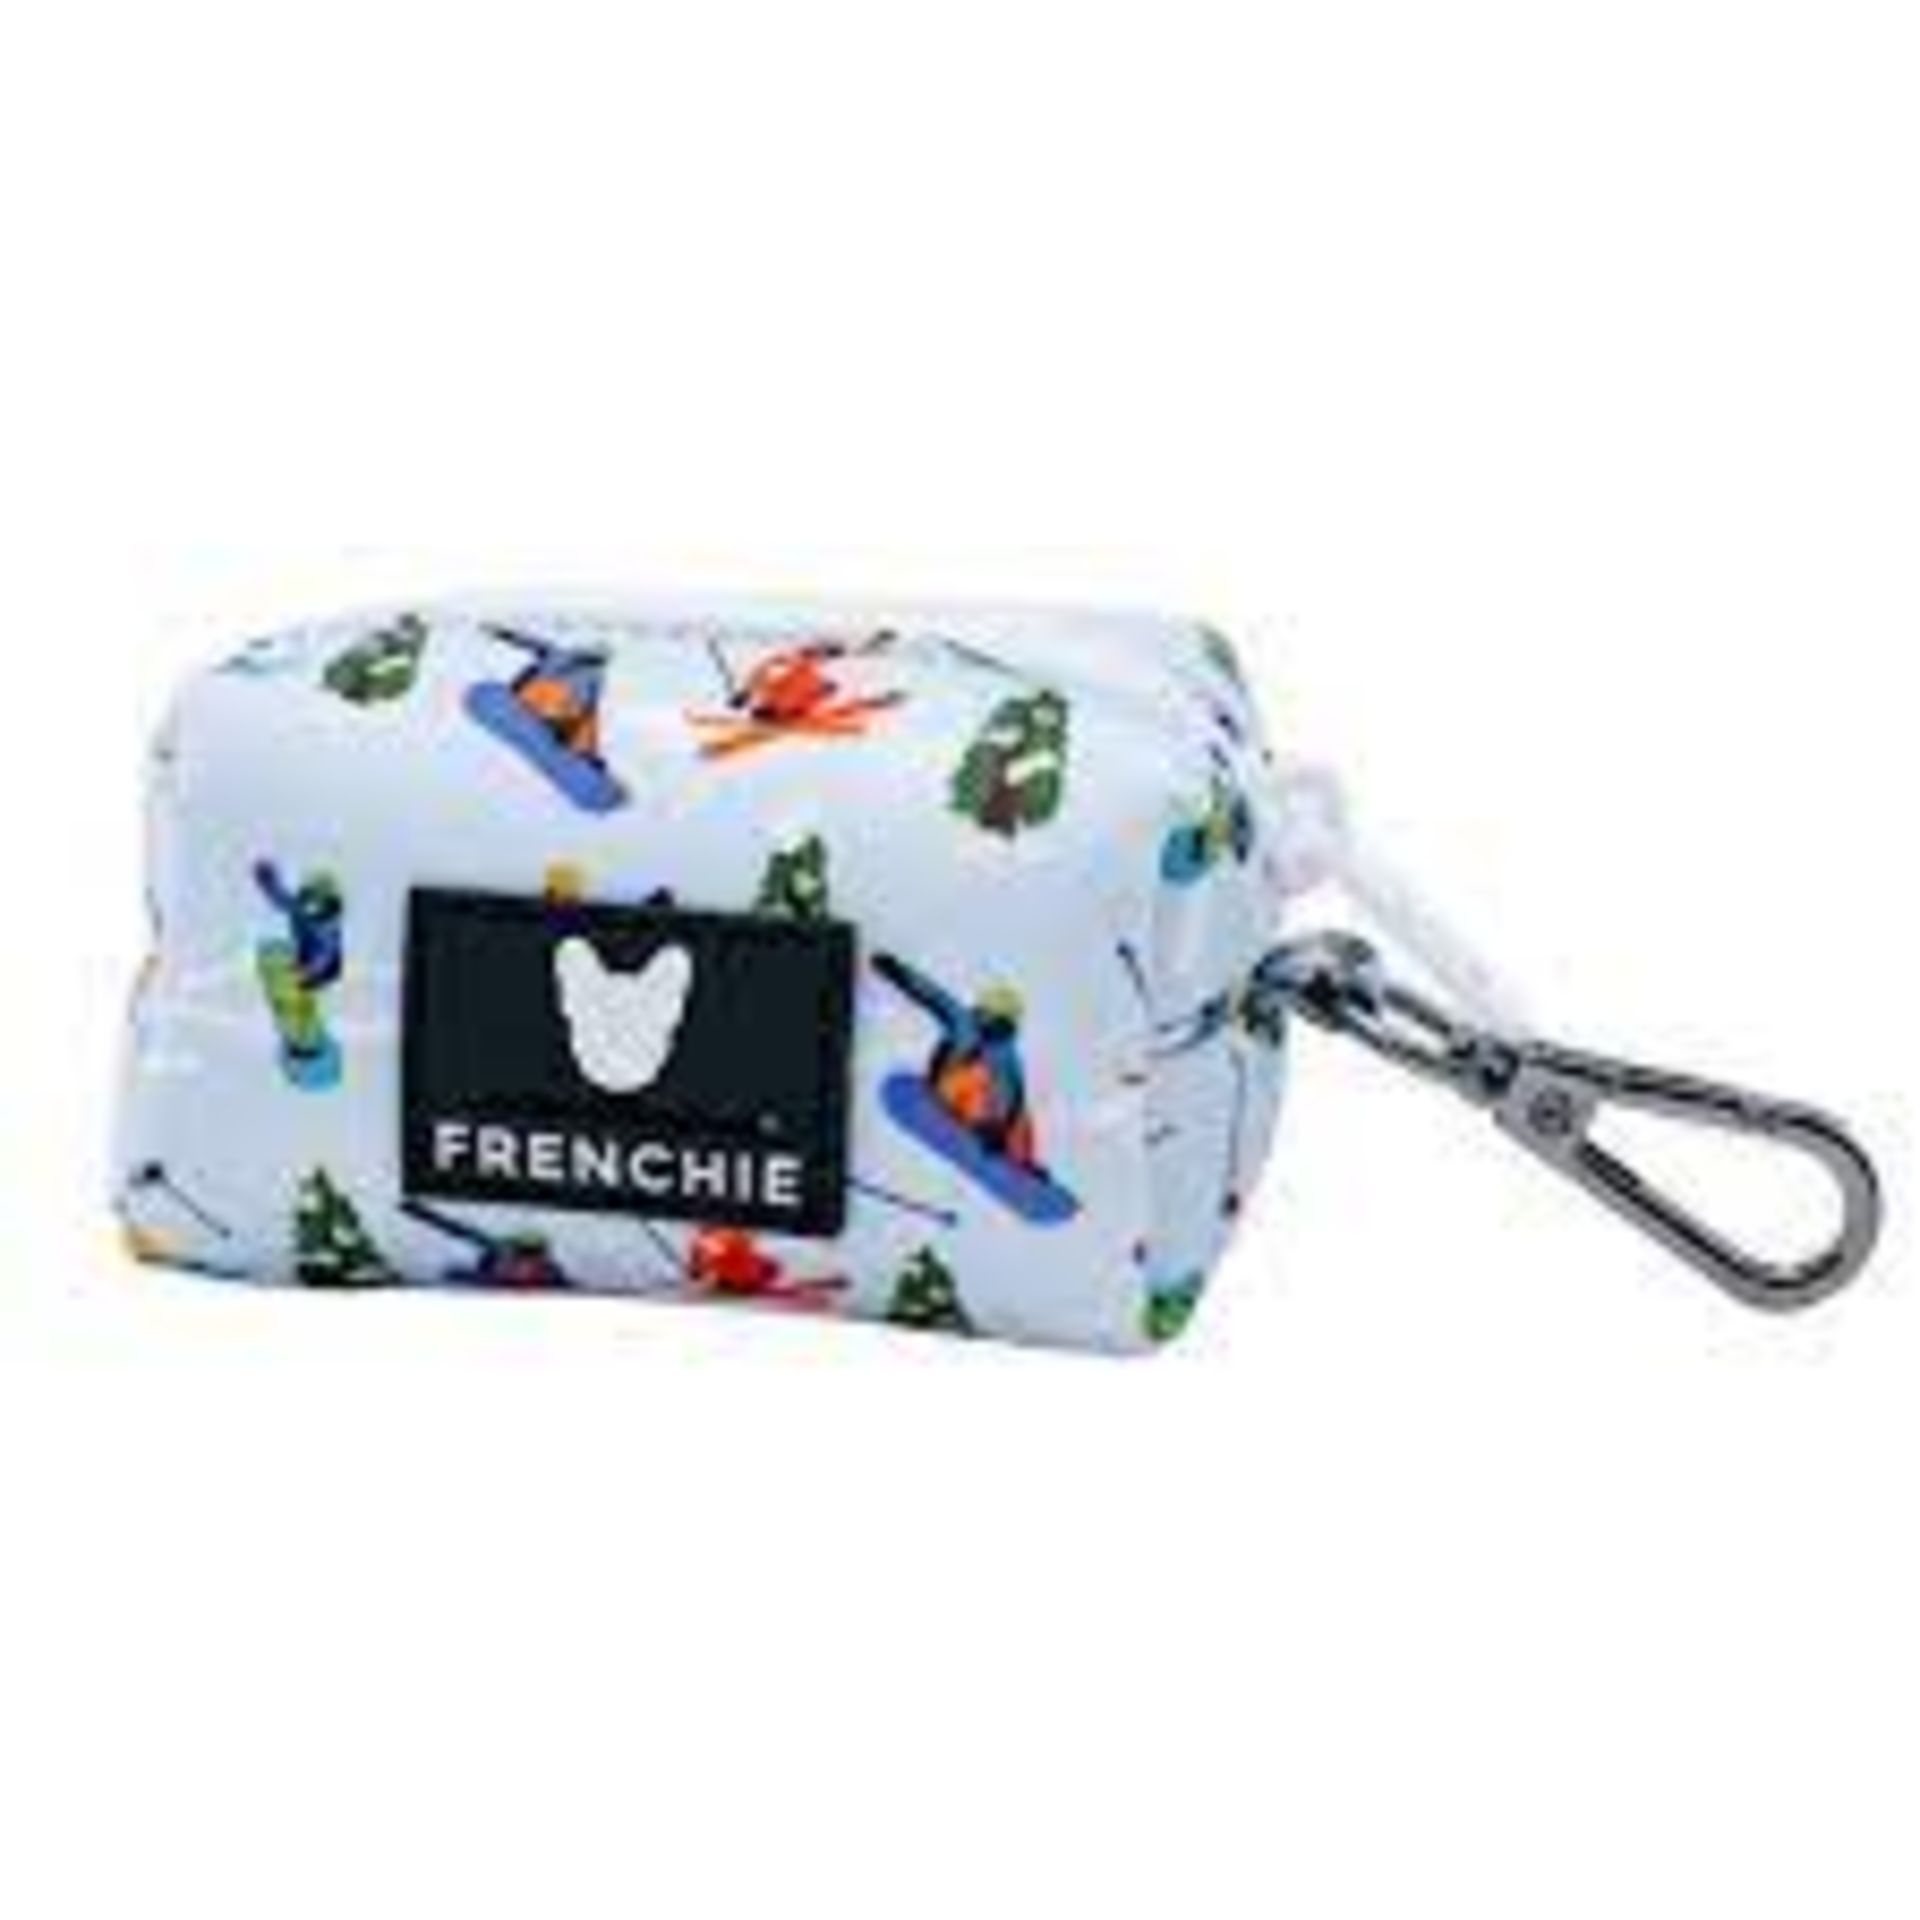 Trade Lot 50 X New .Packaged Frenchie The Bulldog Luxury Branded Dog Products. May include items - Image 35 of 50